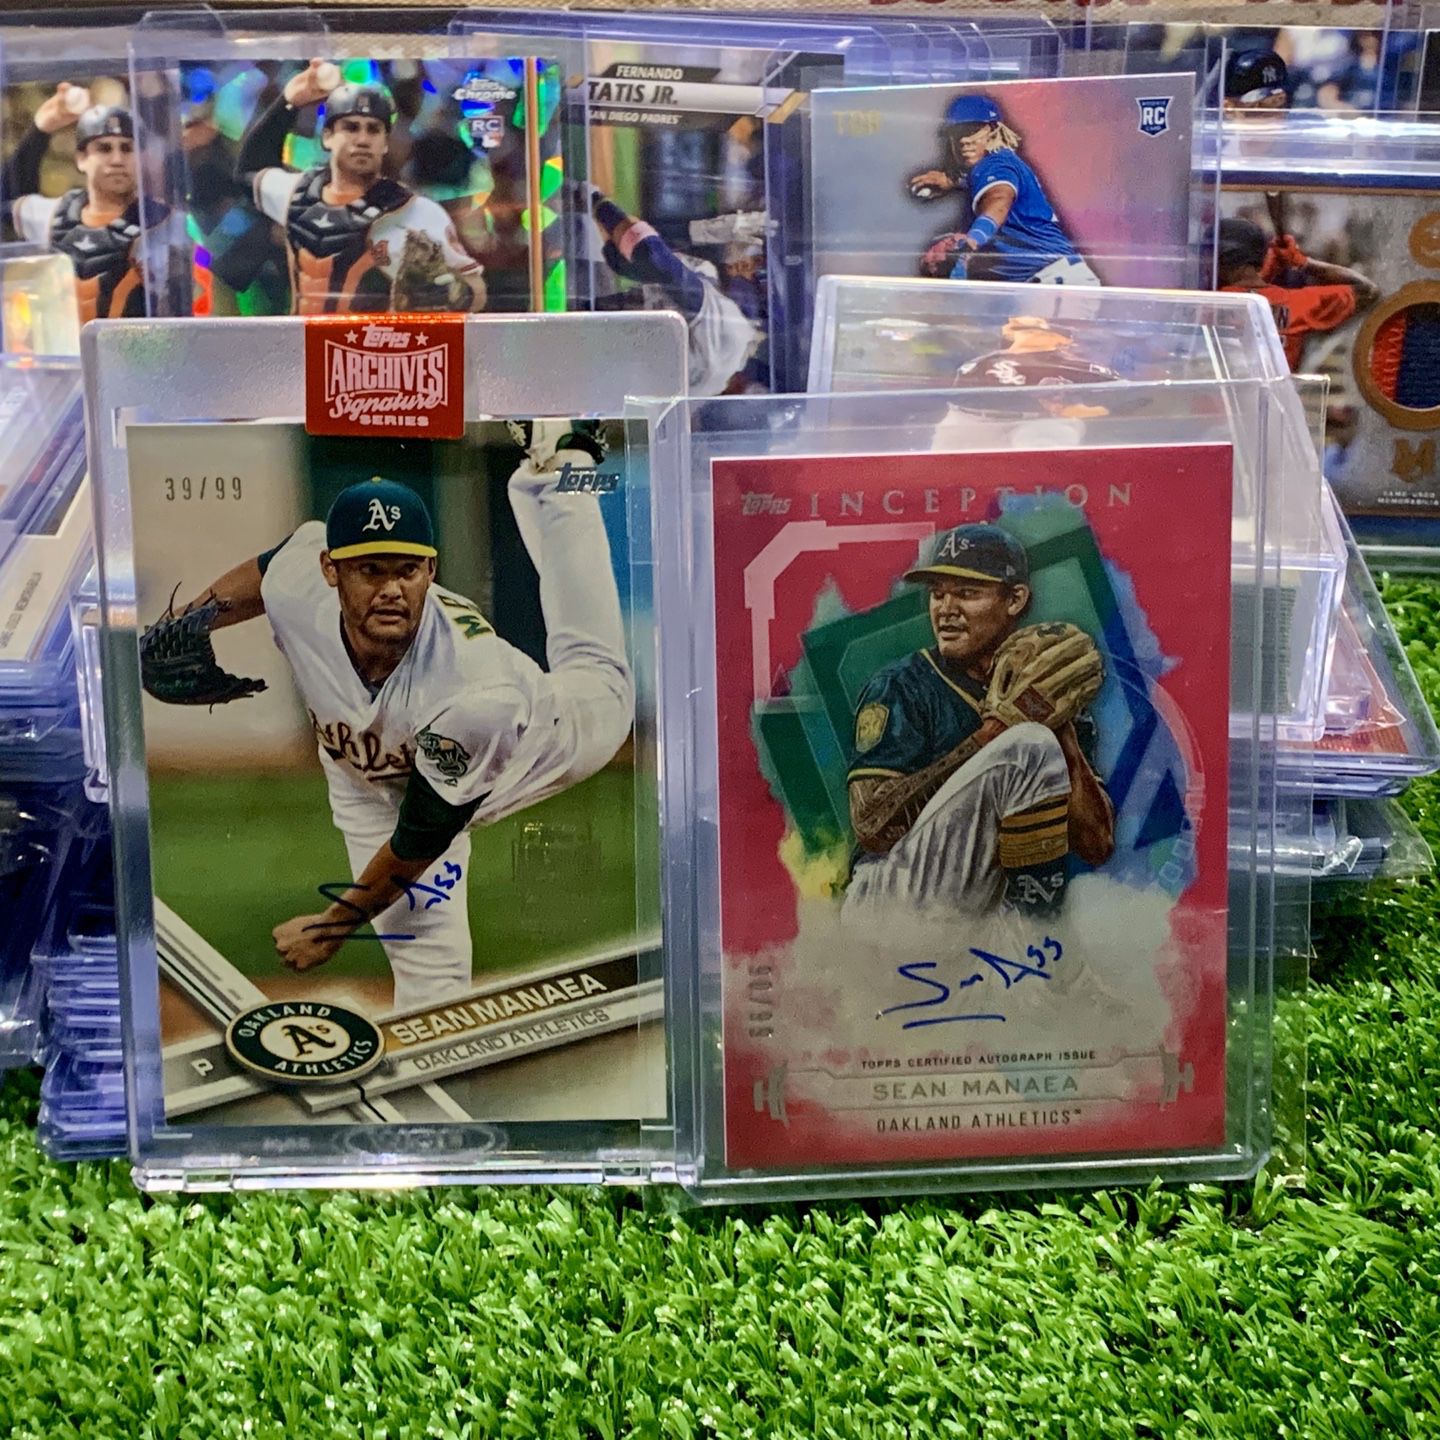 Sean Manaea Oakland Athletics Autographed Baseball Cards Both Numbered Out Of 99 Topps Archives And Inception